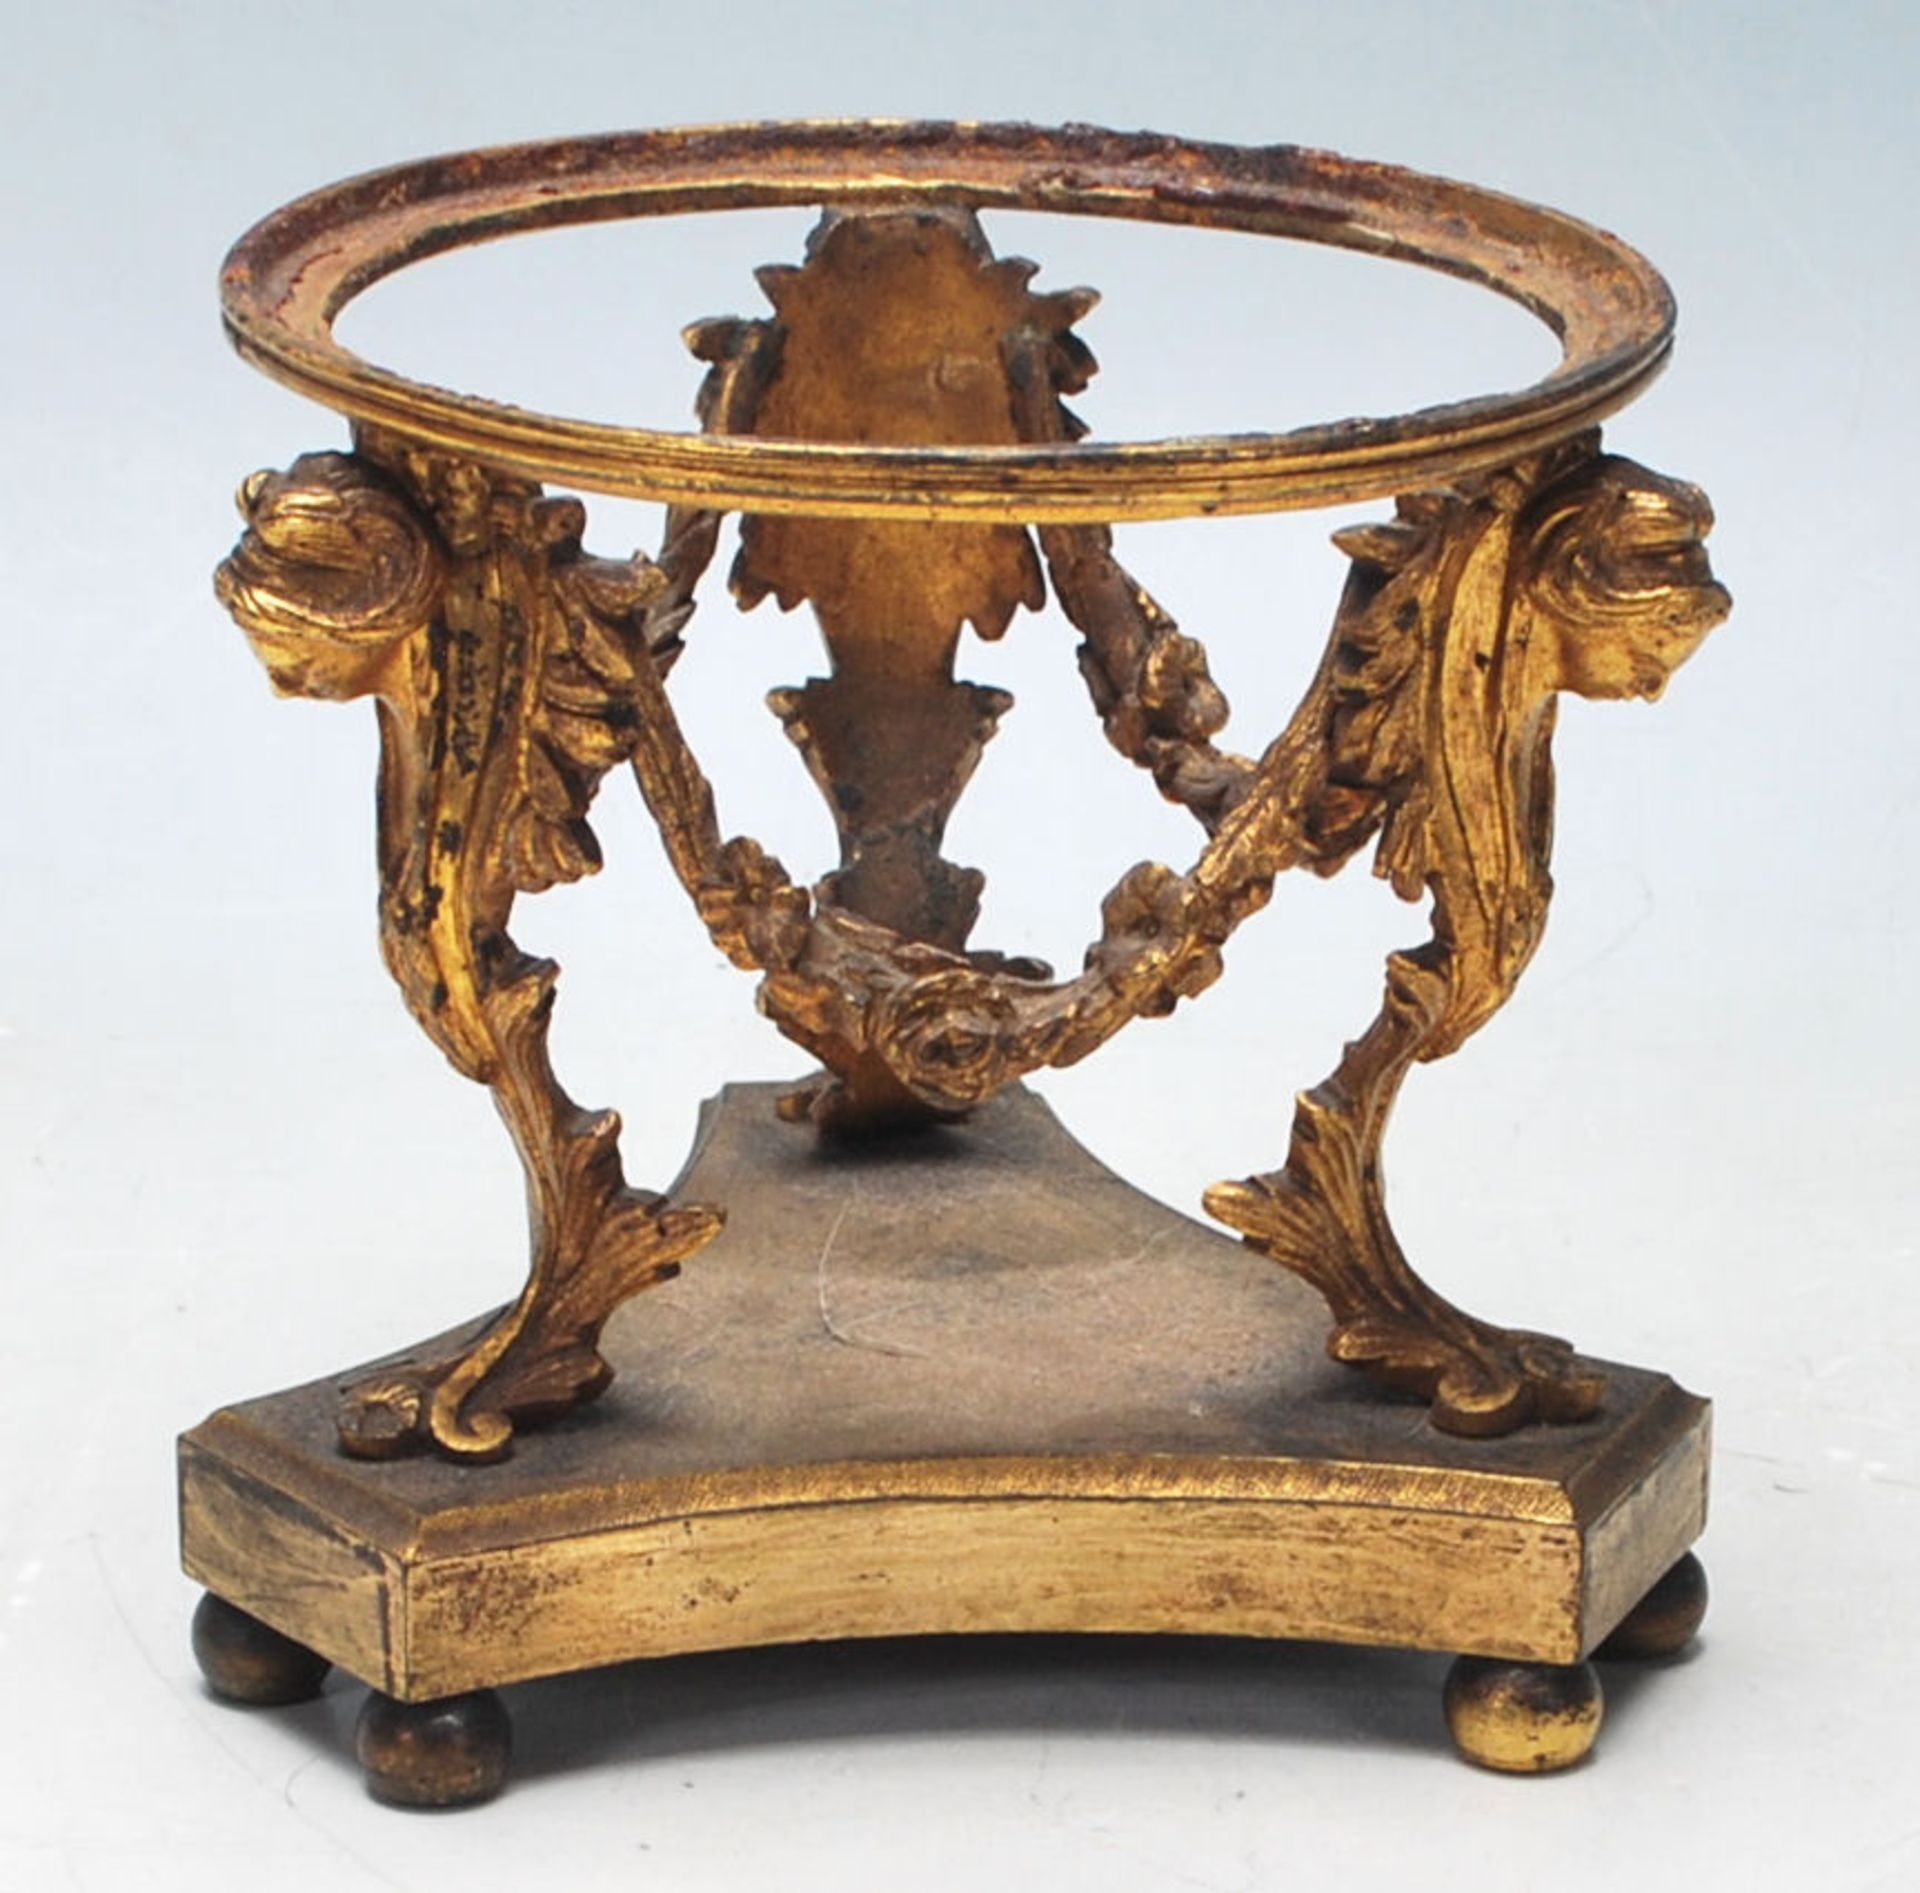 A 19th Century Victorian Brass Ormolu vase stand decorated with goddesses, swags and acanthus leaves